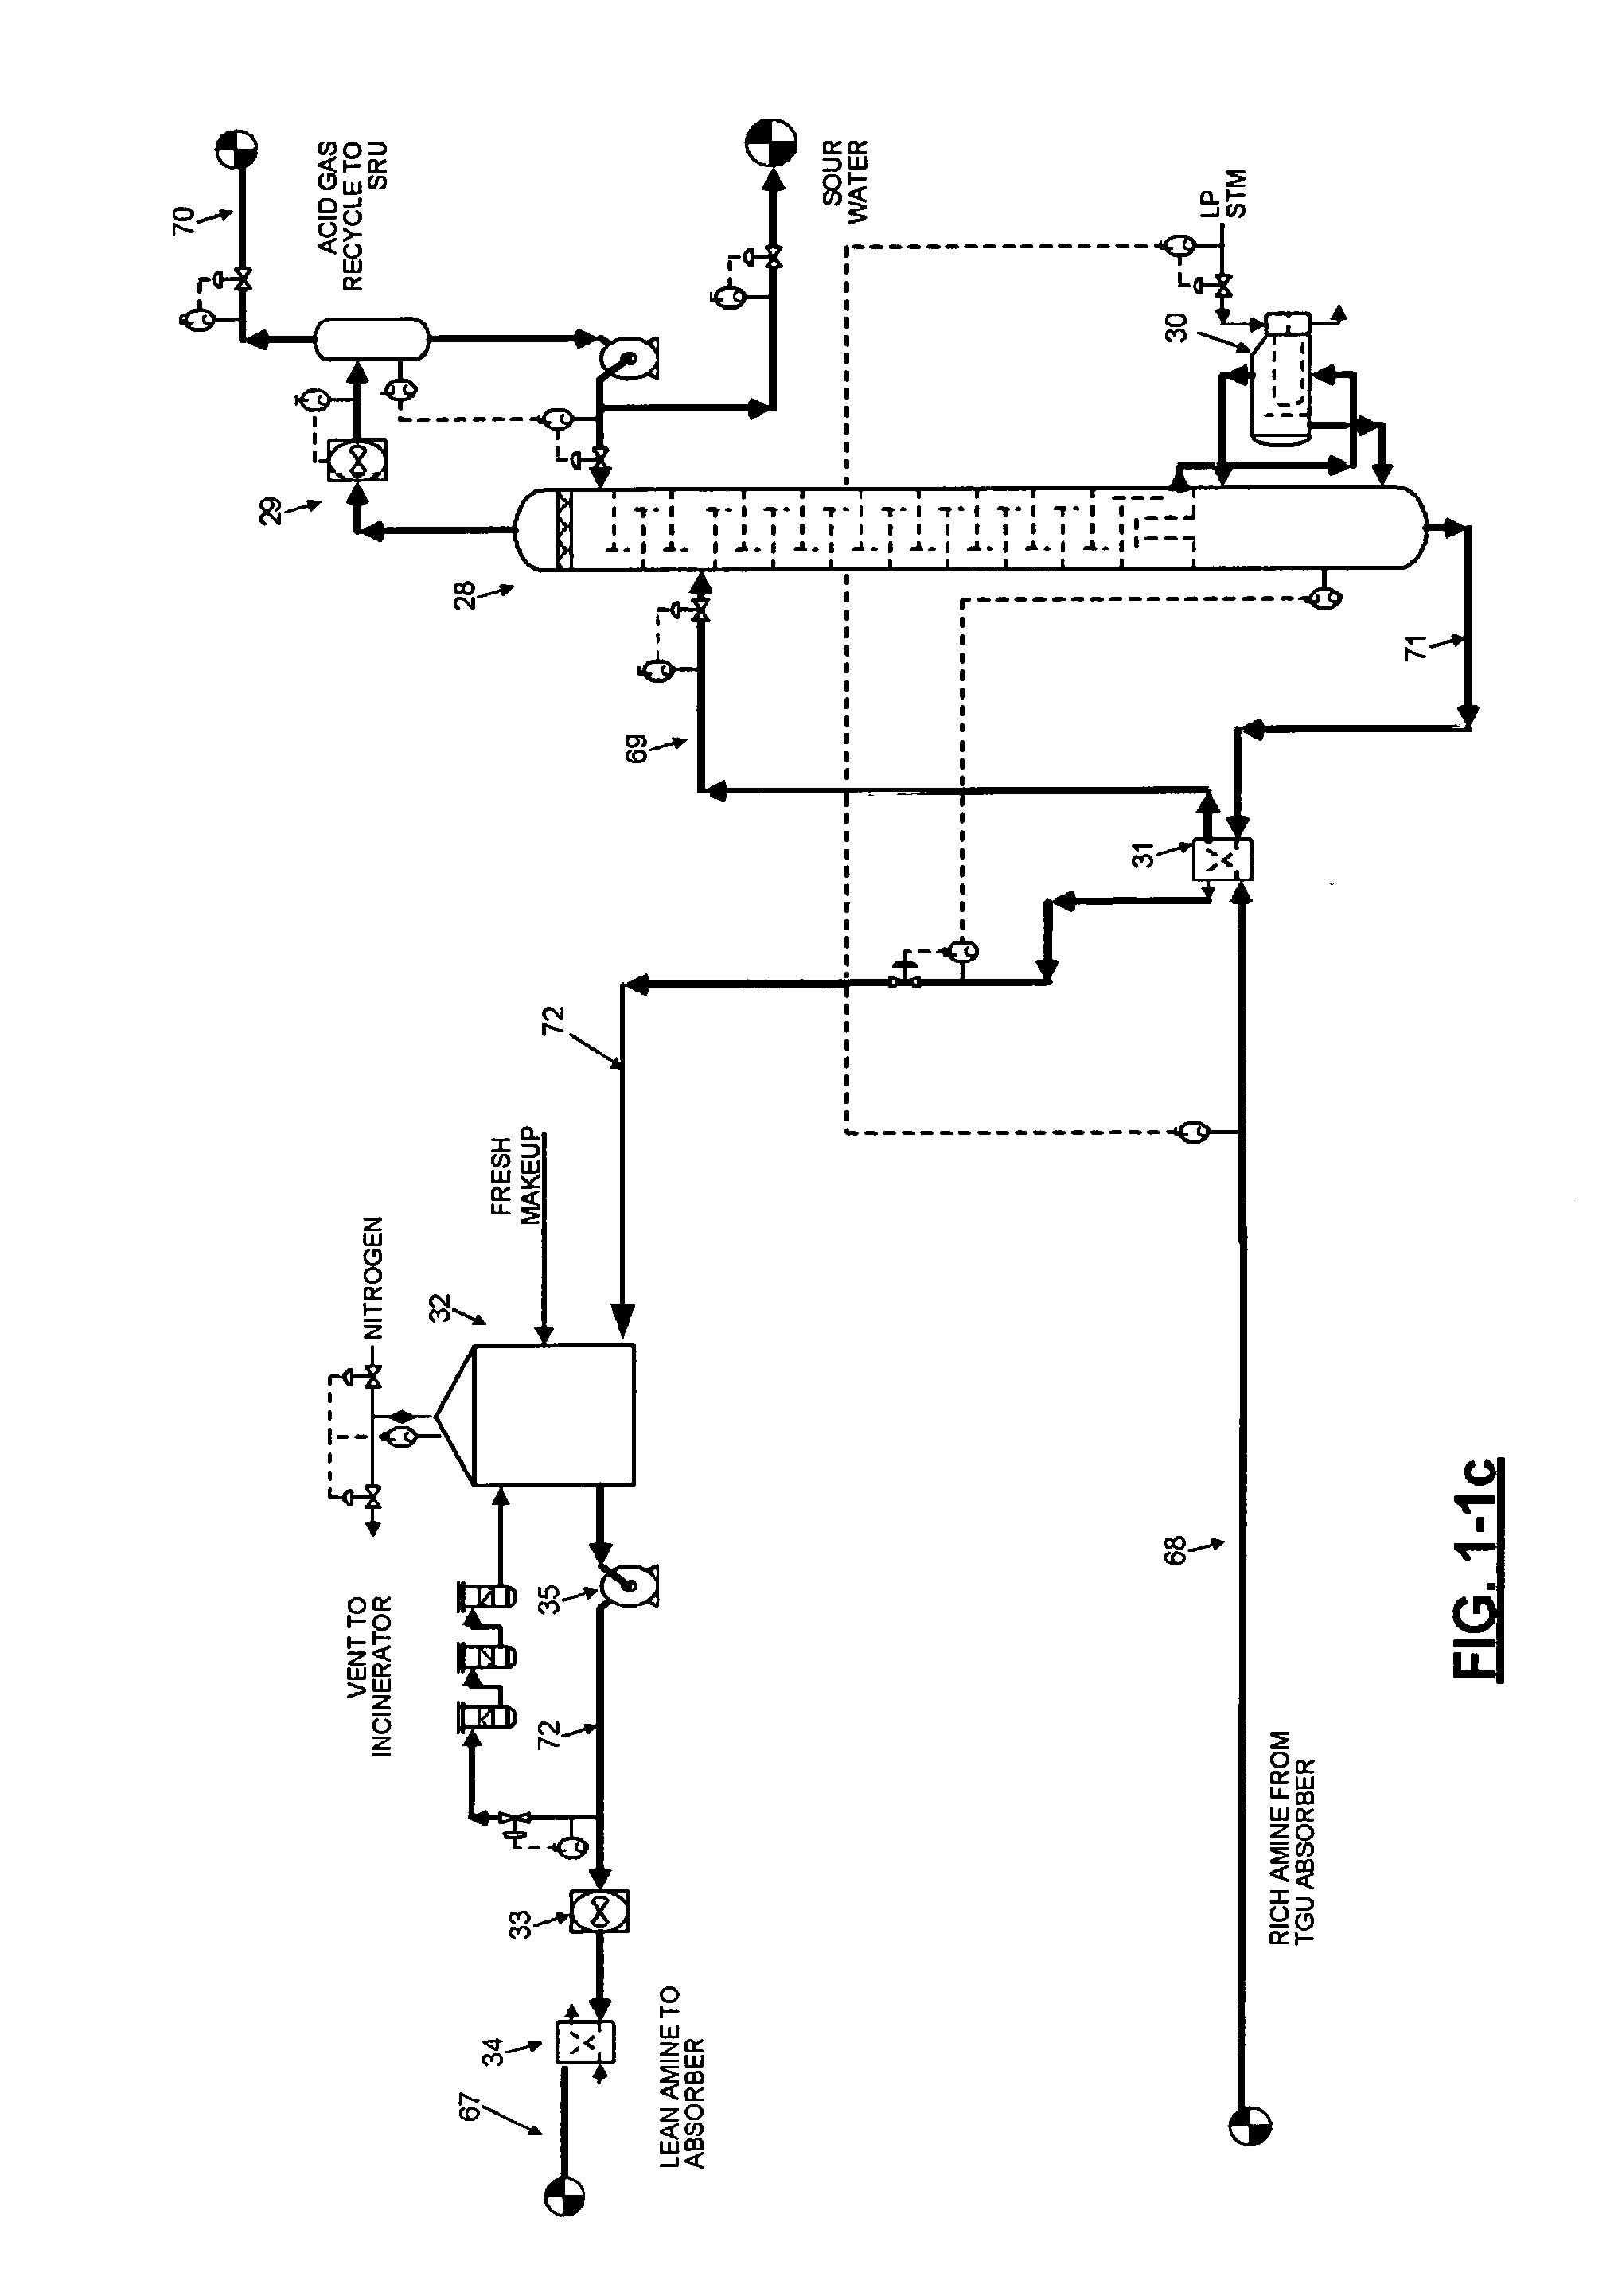 Supersulf- a process with internal cooling and heating reactors in subdewpoint sulfur recovery and tail gas treating systems